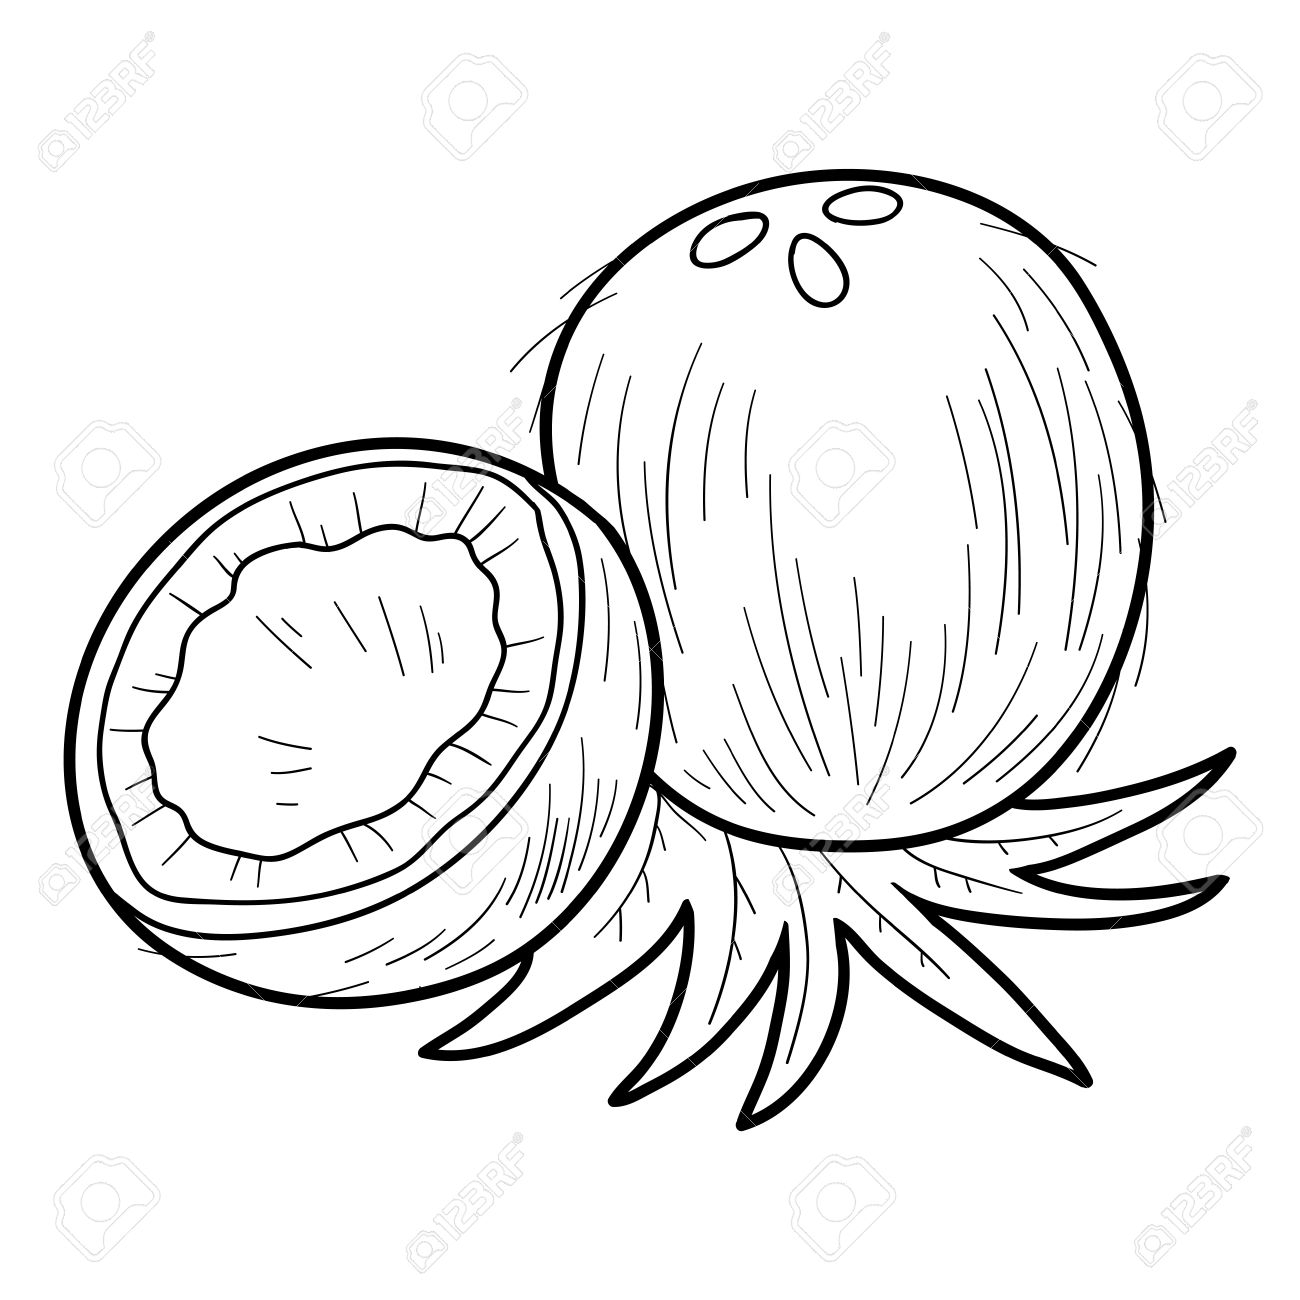 Coconut Clipart coloring page